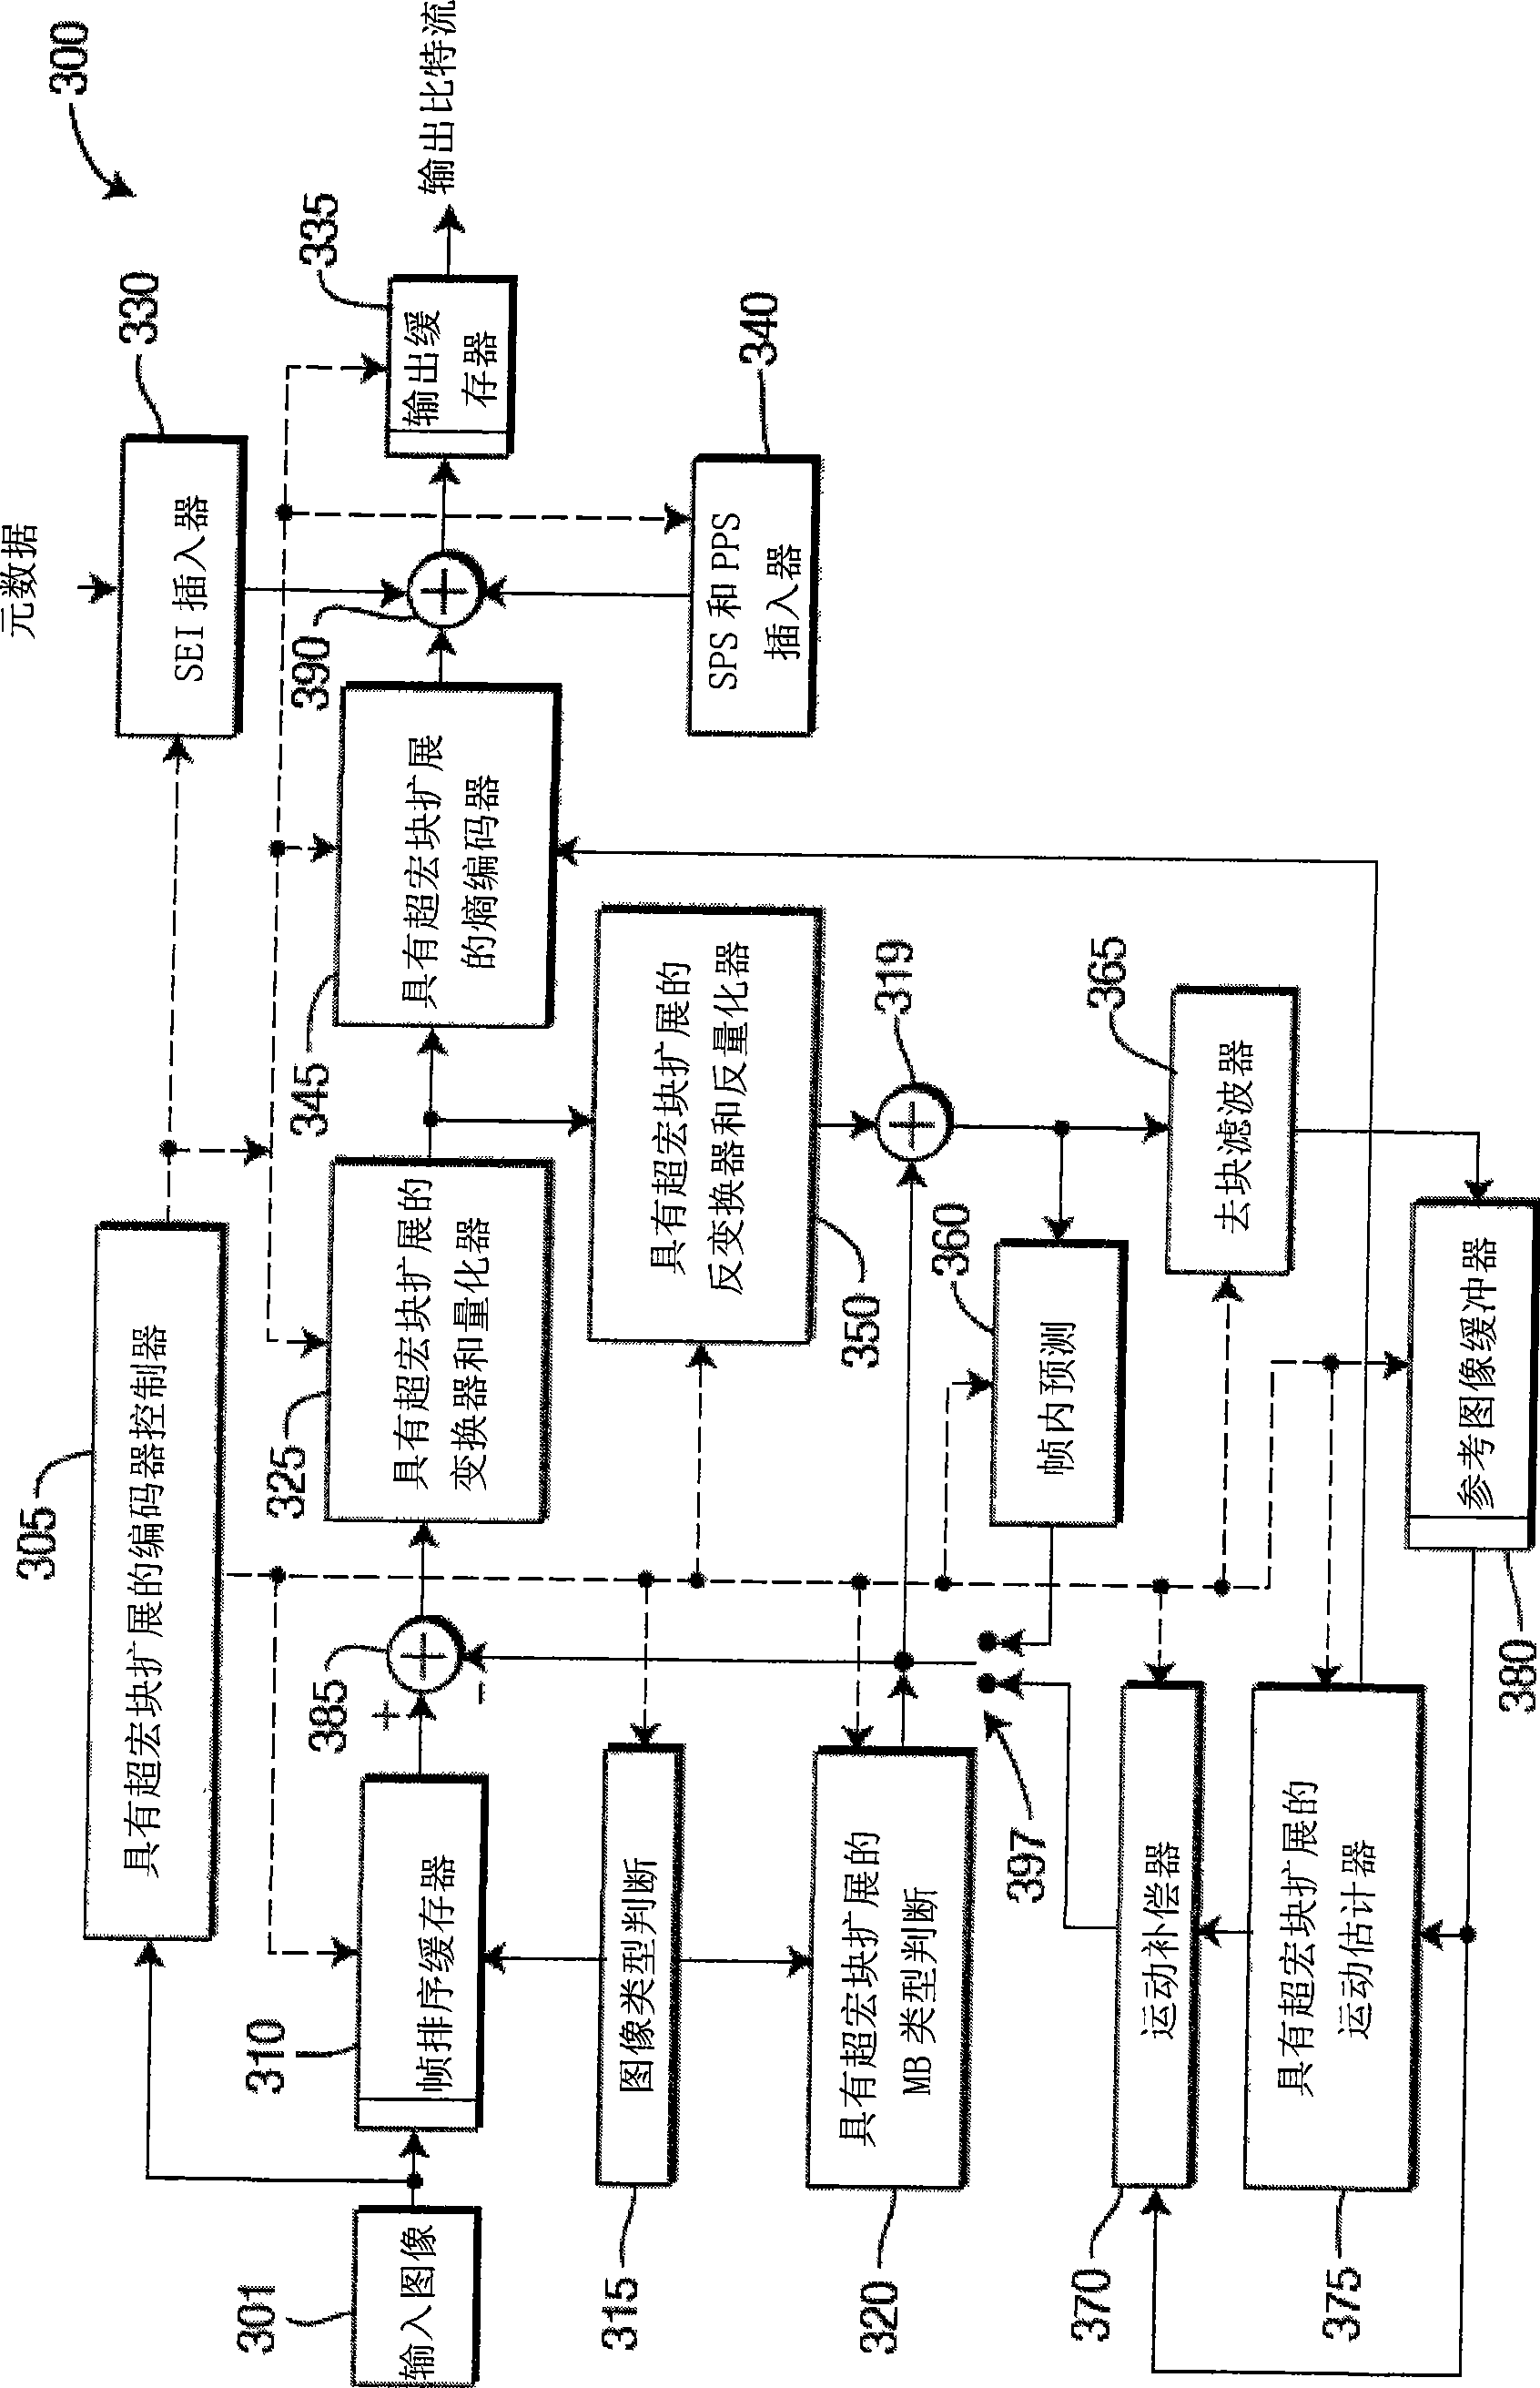 Methods and apparatus for reduced resolution partitioning